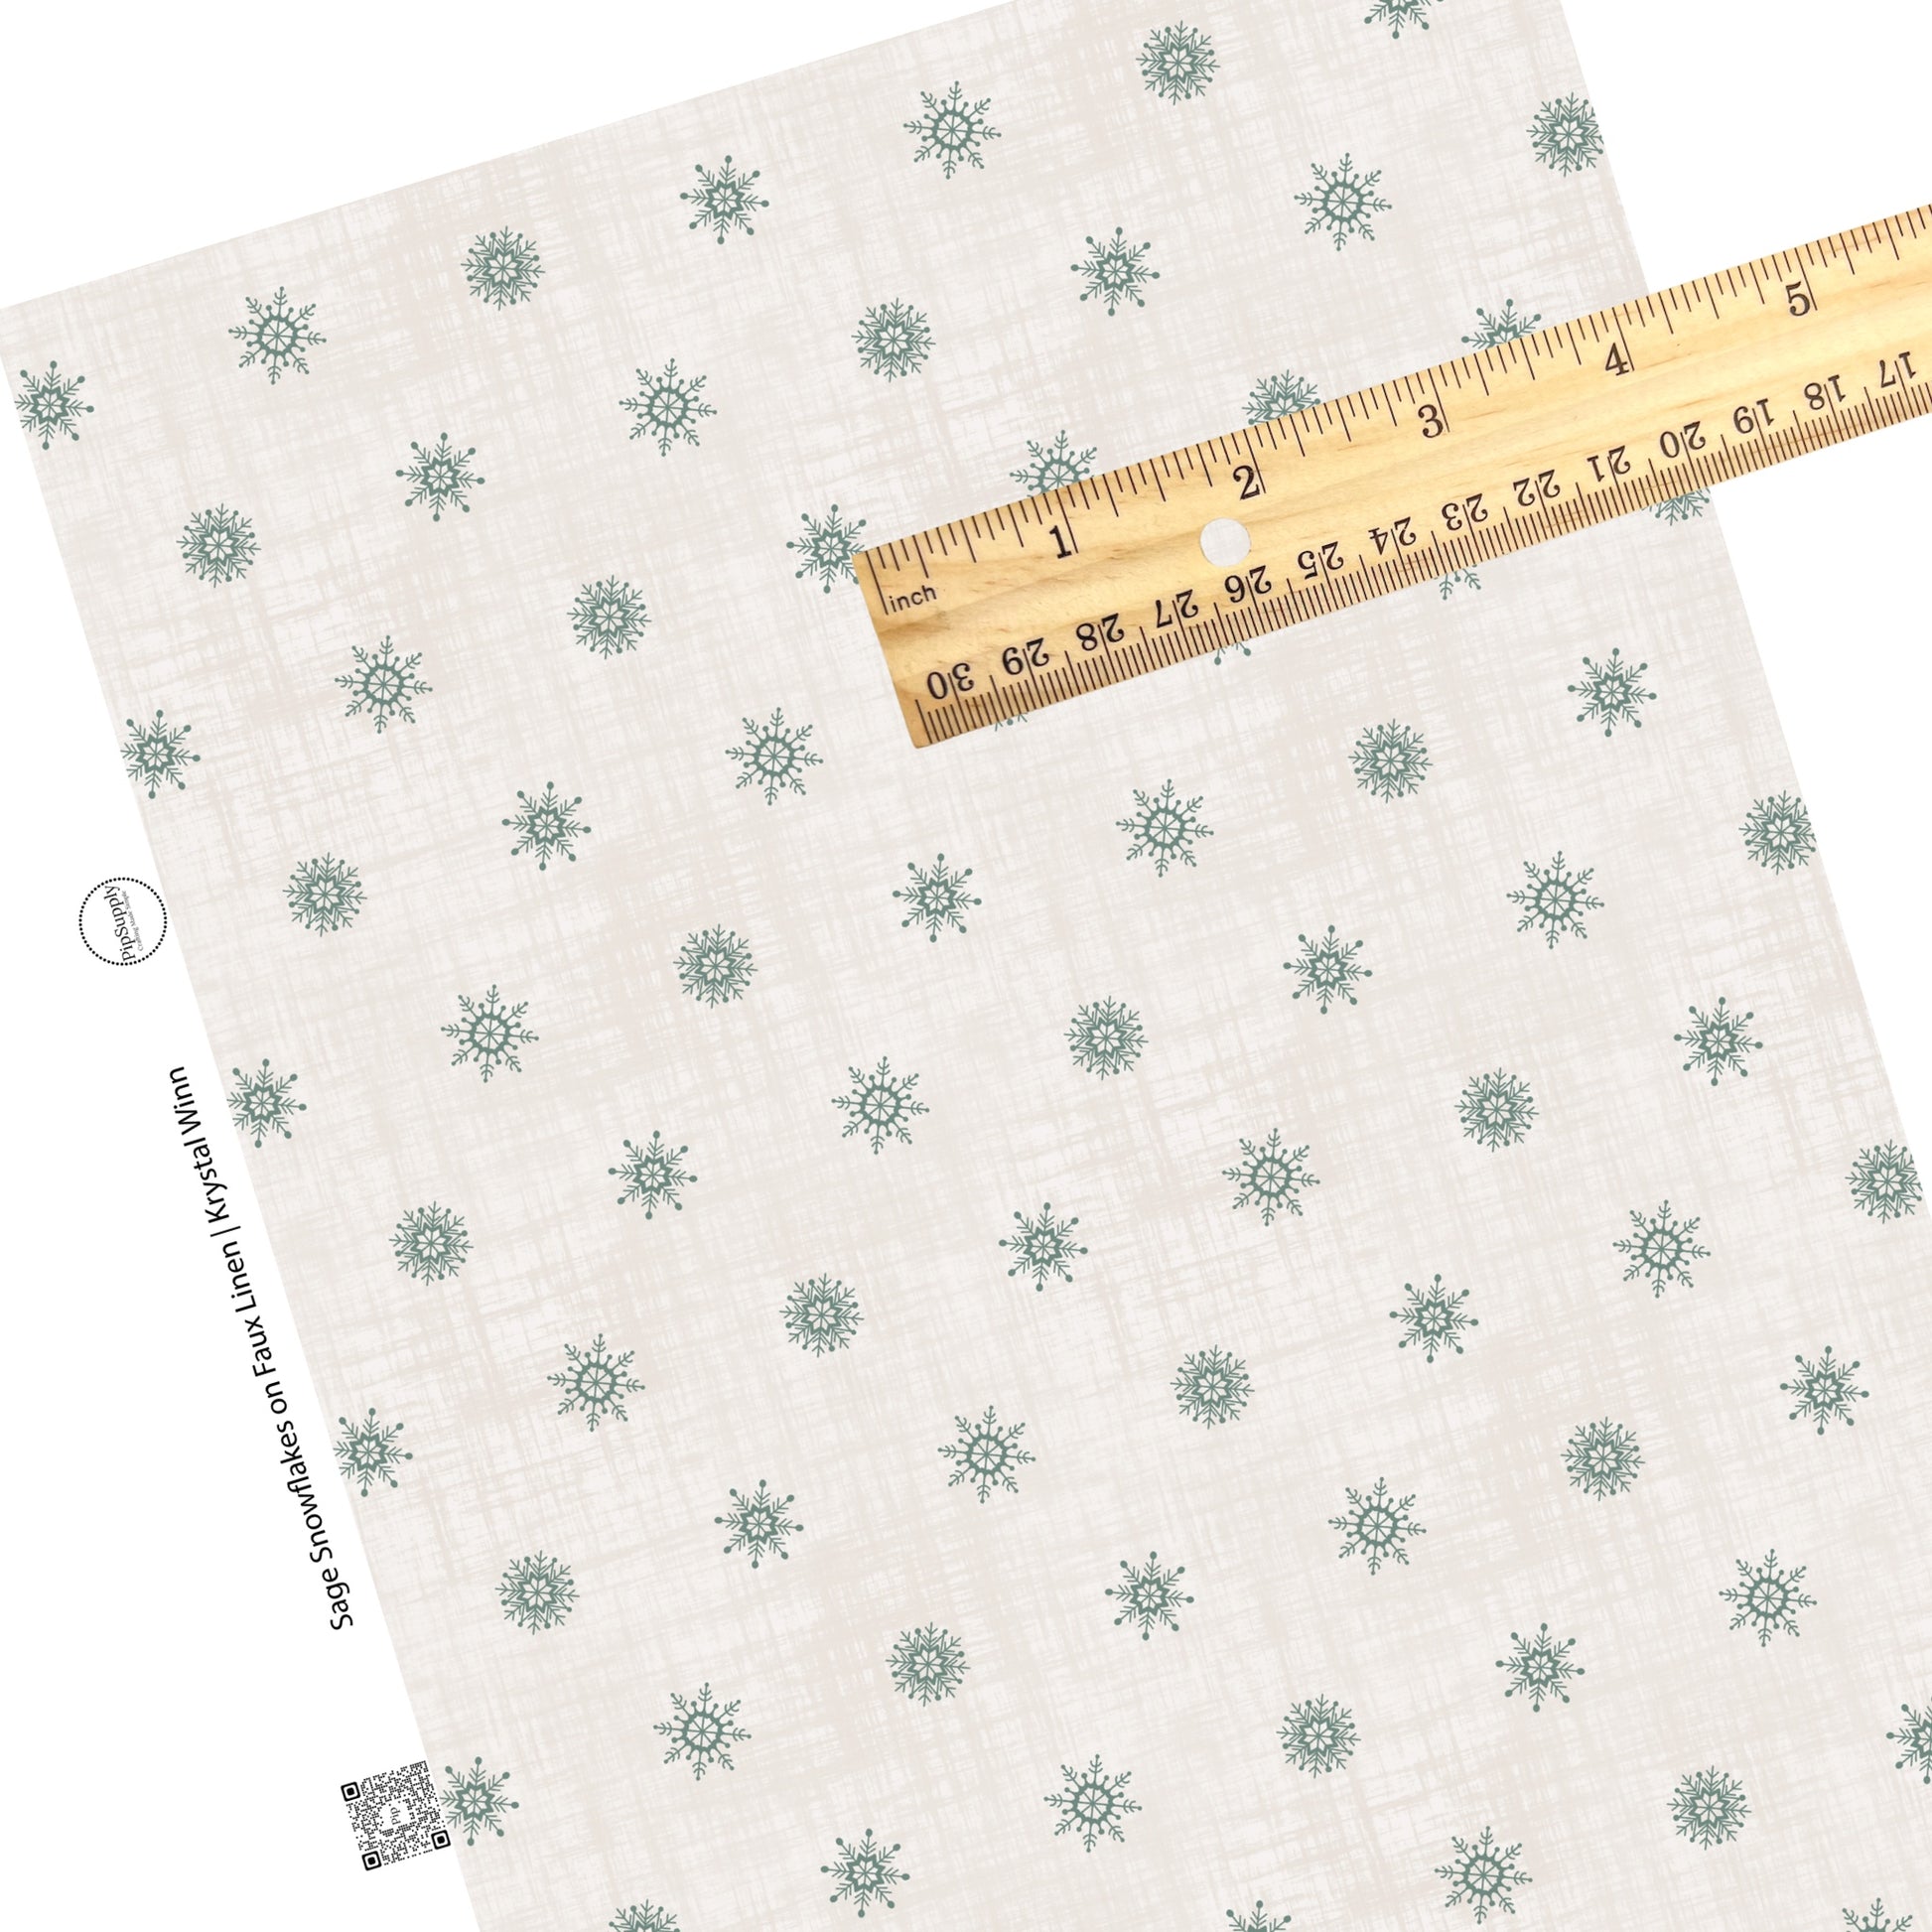 These holiday themed faux leather sheets contain the following design elements: Christmas green snowflakes on cream. Our CPSIA compliant faux leather sheets or rolls can be used for all types of crafting projects.